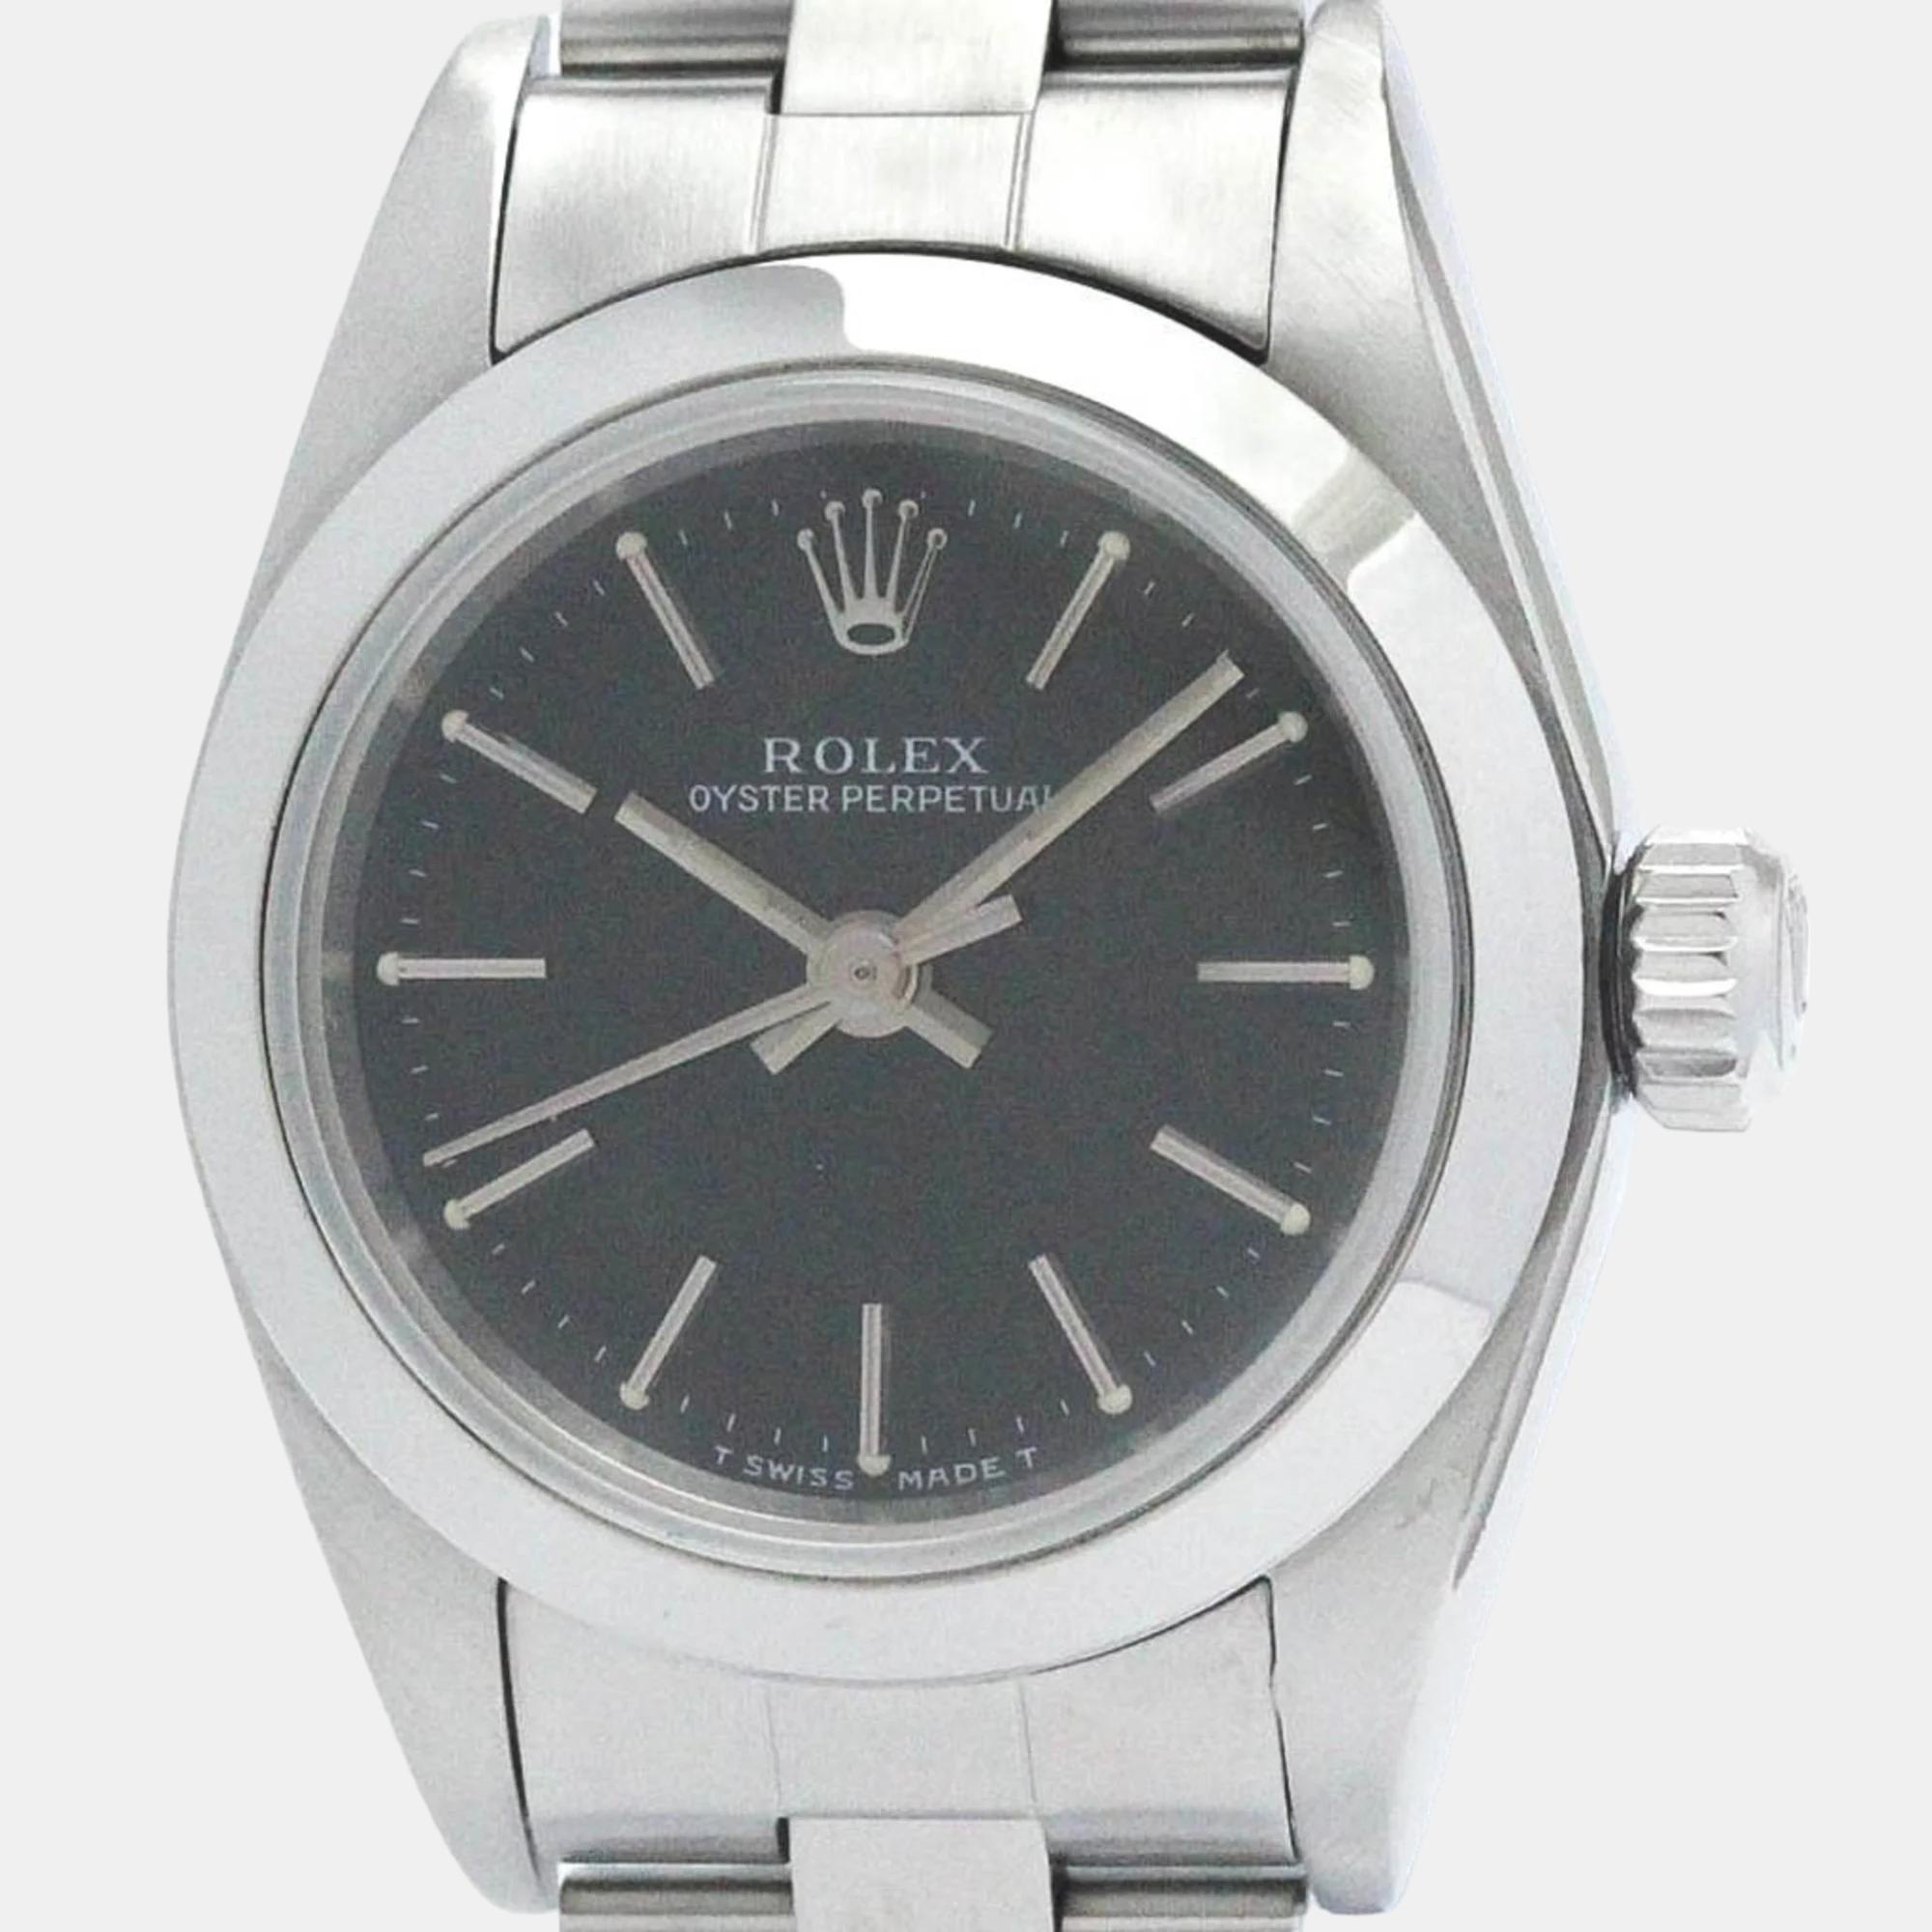 Rolex black stainless steel oyster perpetual 67180 automatic women's wristwatch 24 mm